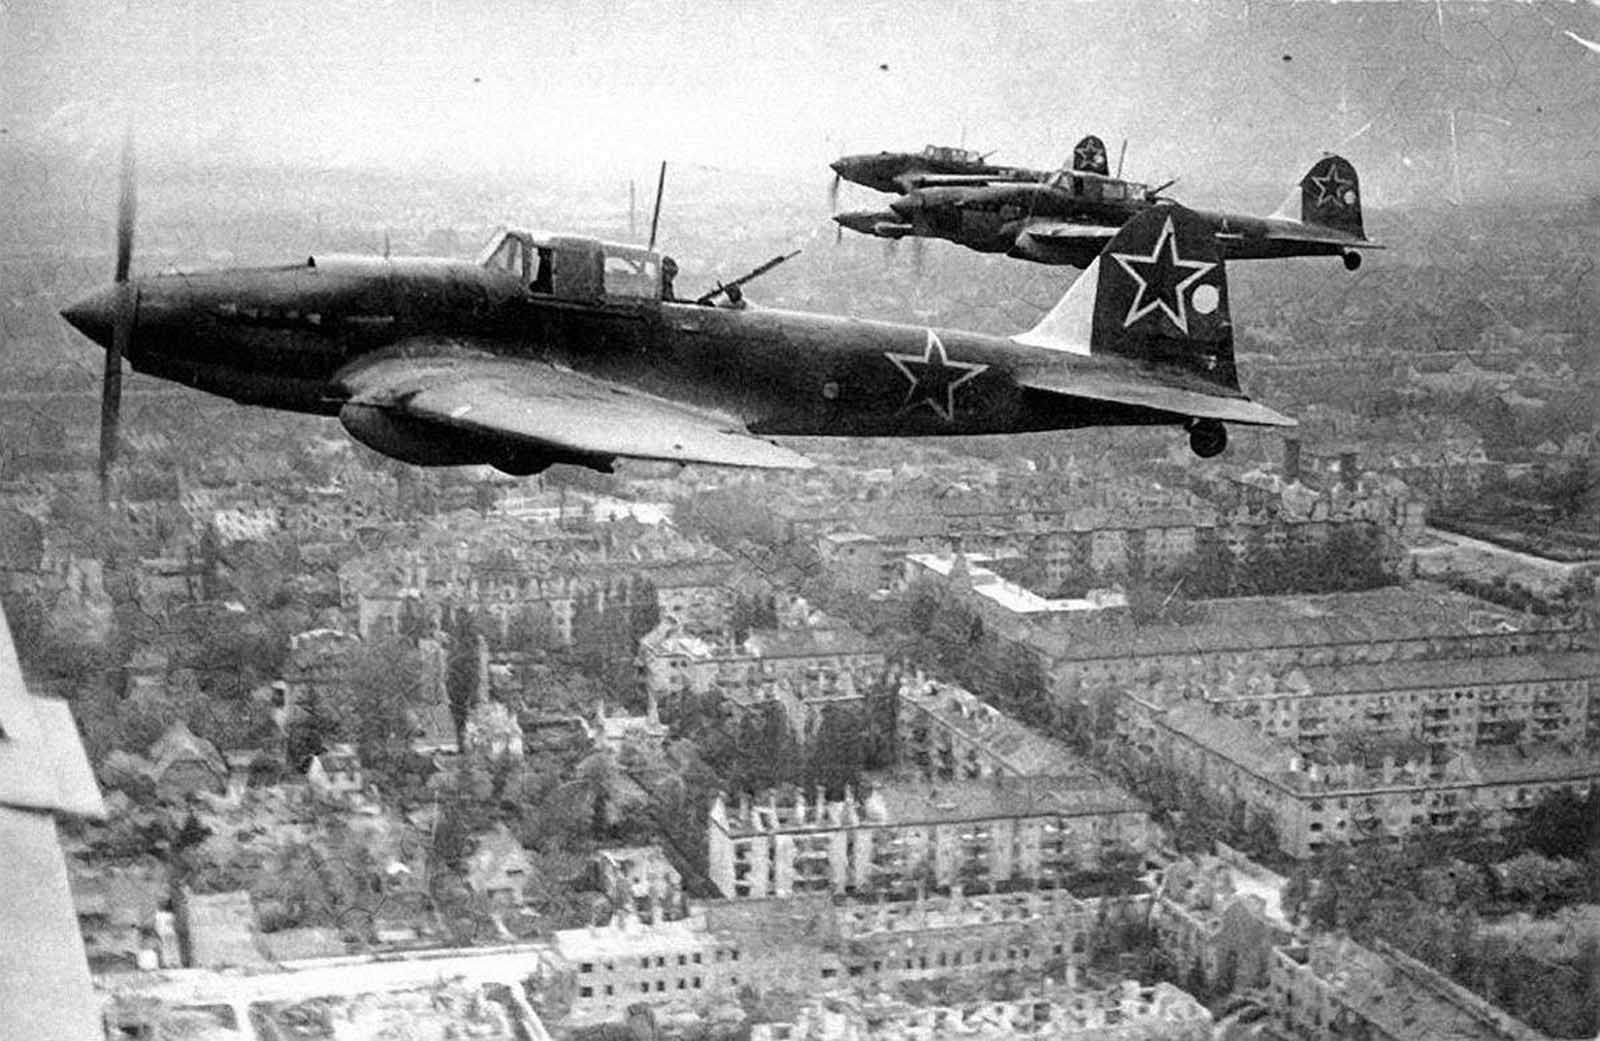 Soviet Ilyushin Il-2 ground attack aircraft fly in the skies above Berlin, Germany in 1945.